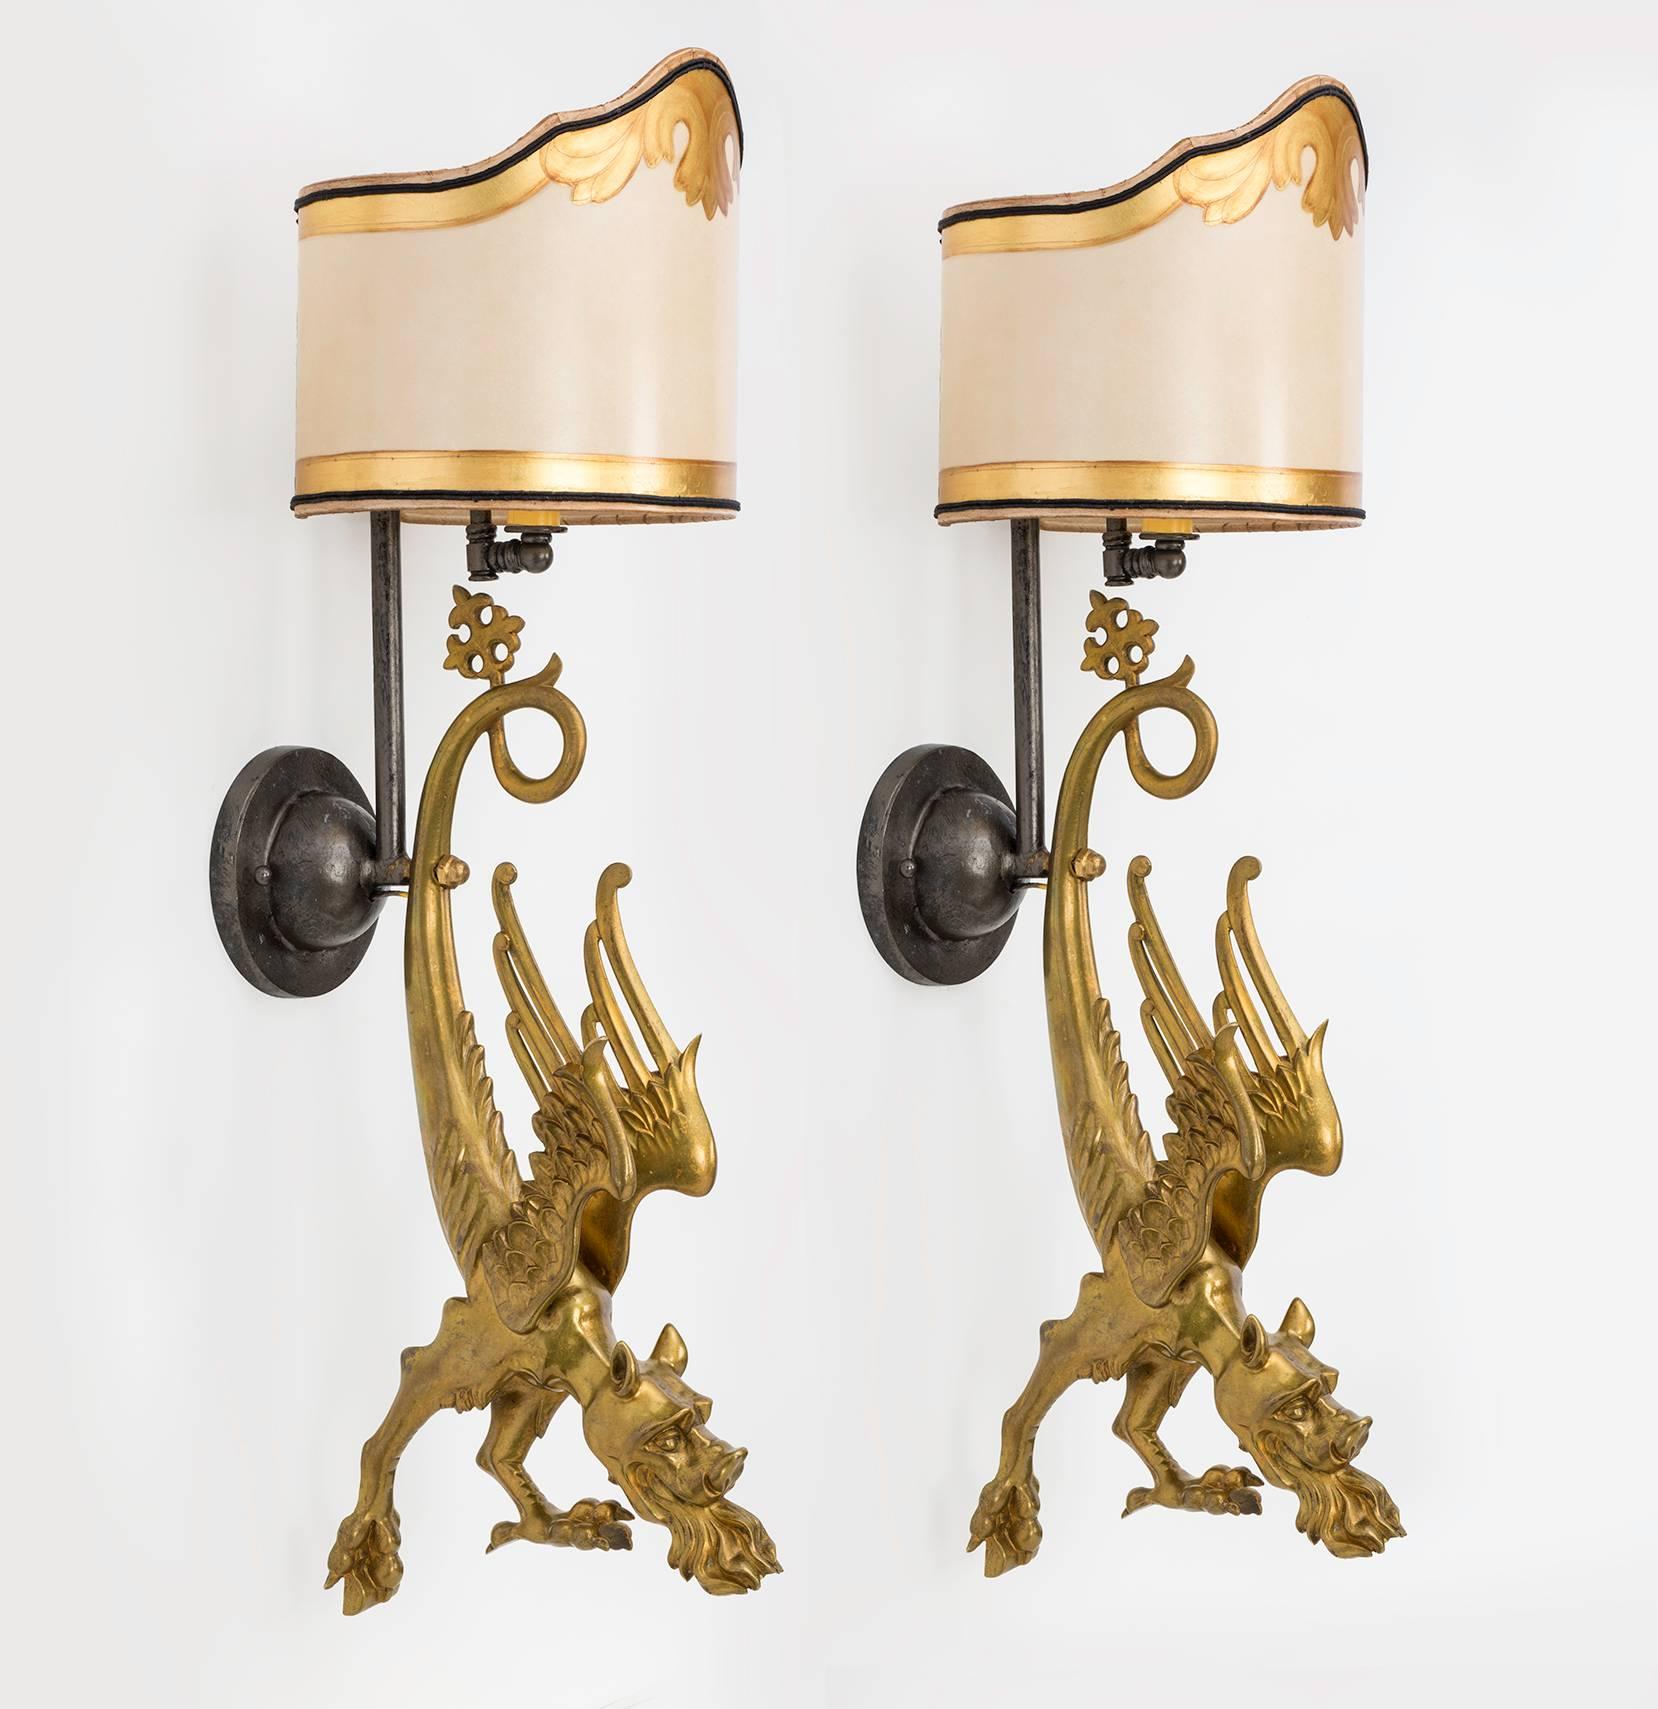 As found, pair of early 1920s gilt  Bronze dragons made into a very charming fire breathing dragon wall sconces. There are wall lights as well as flickering lights from its mouths. Dragons are beautifully cast bronze in gilt finish. Shades are